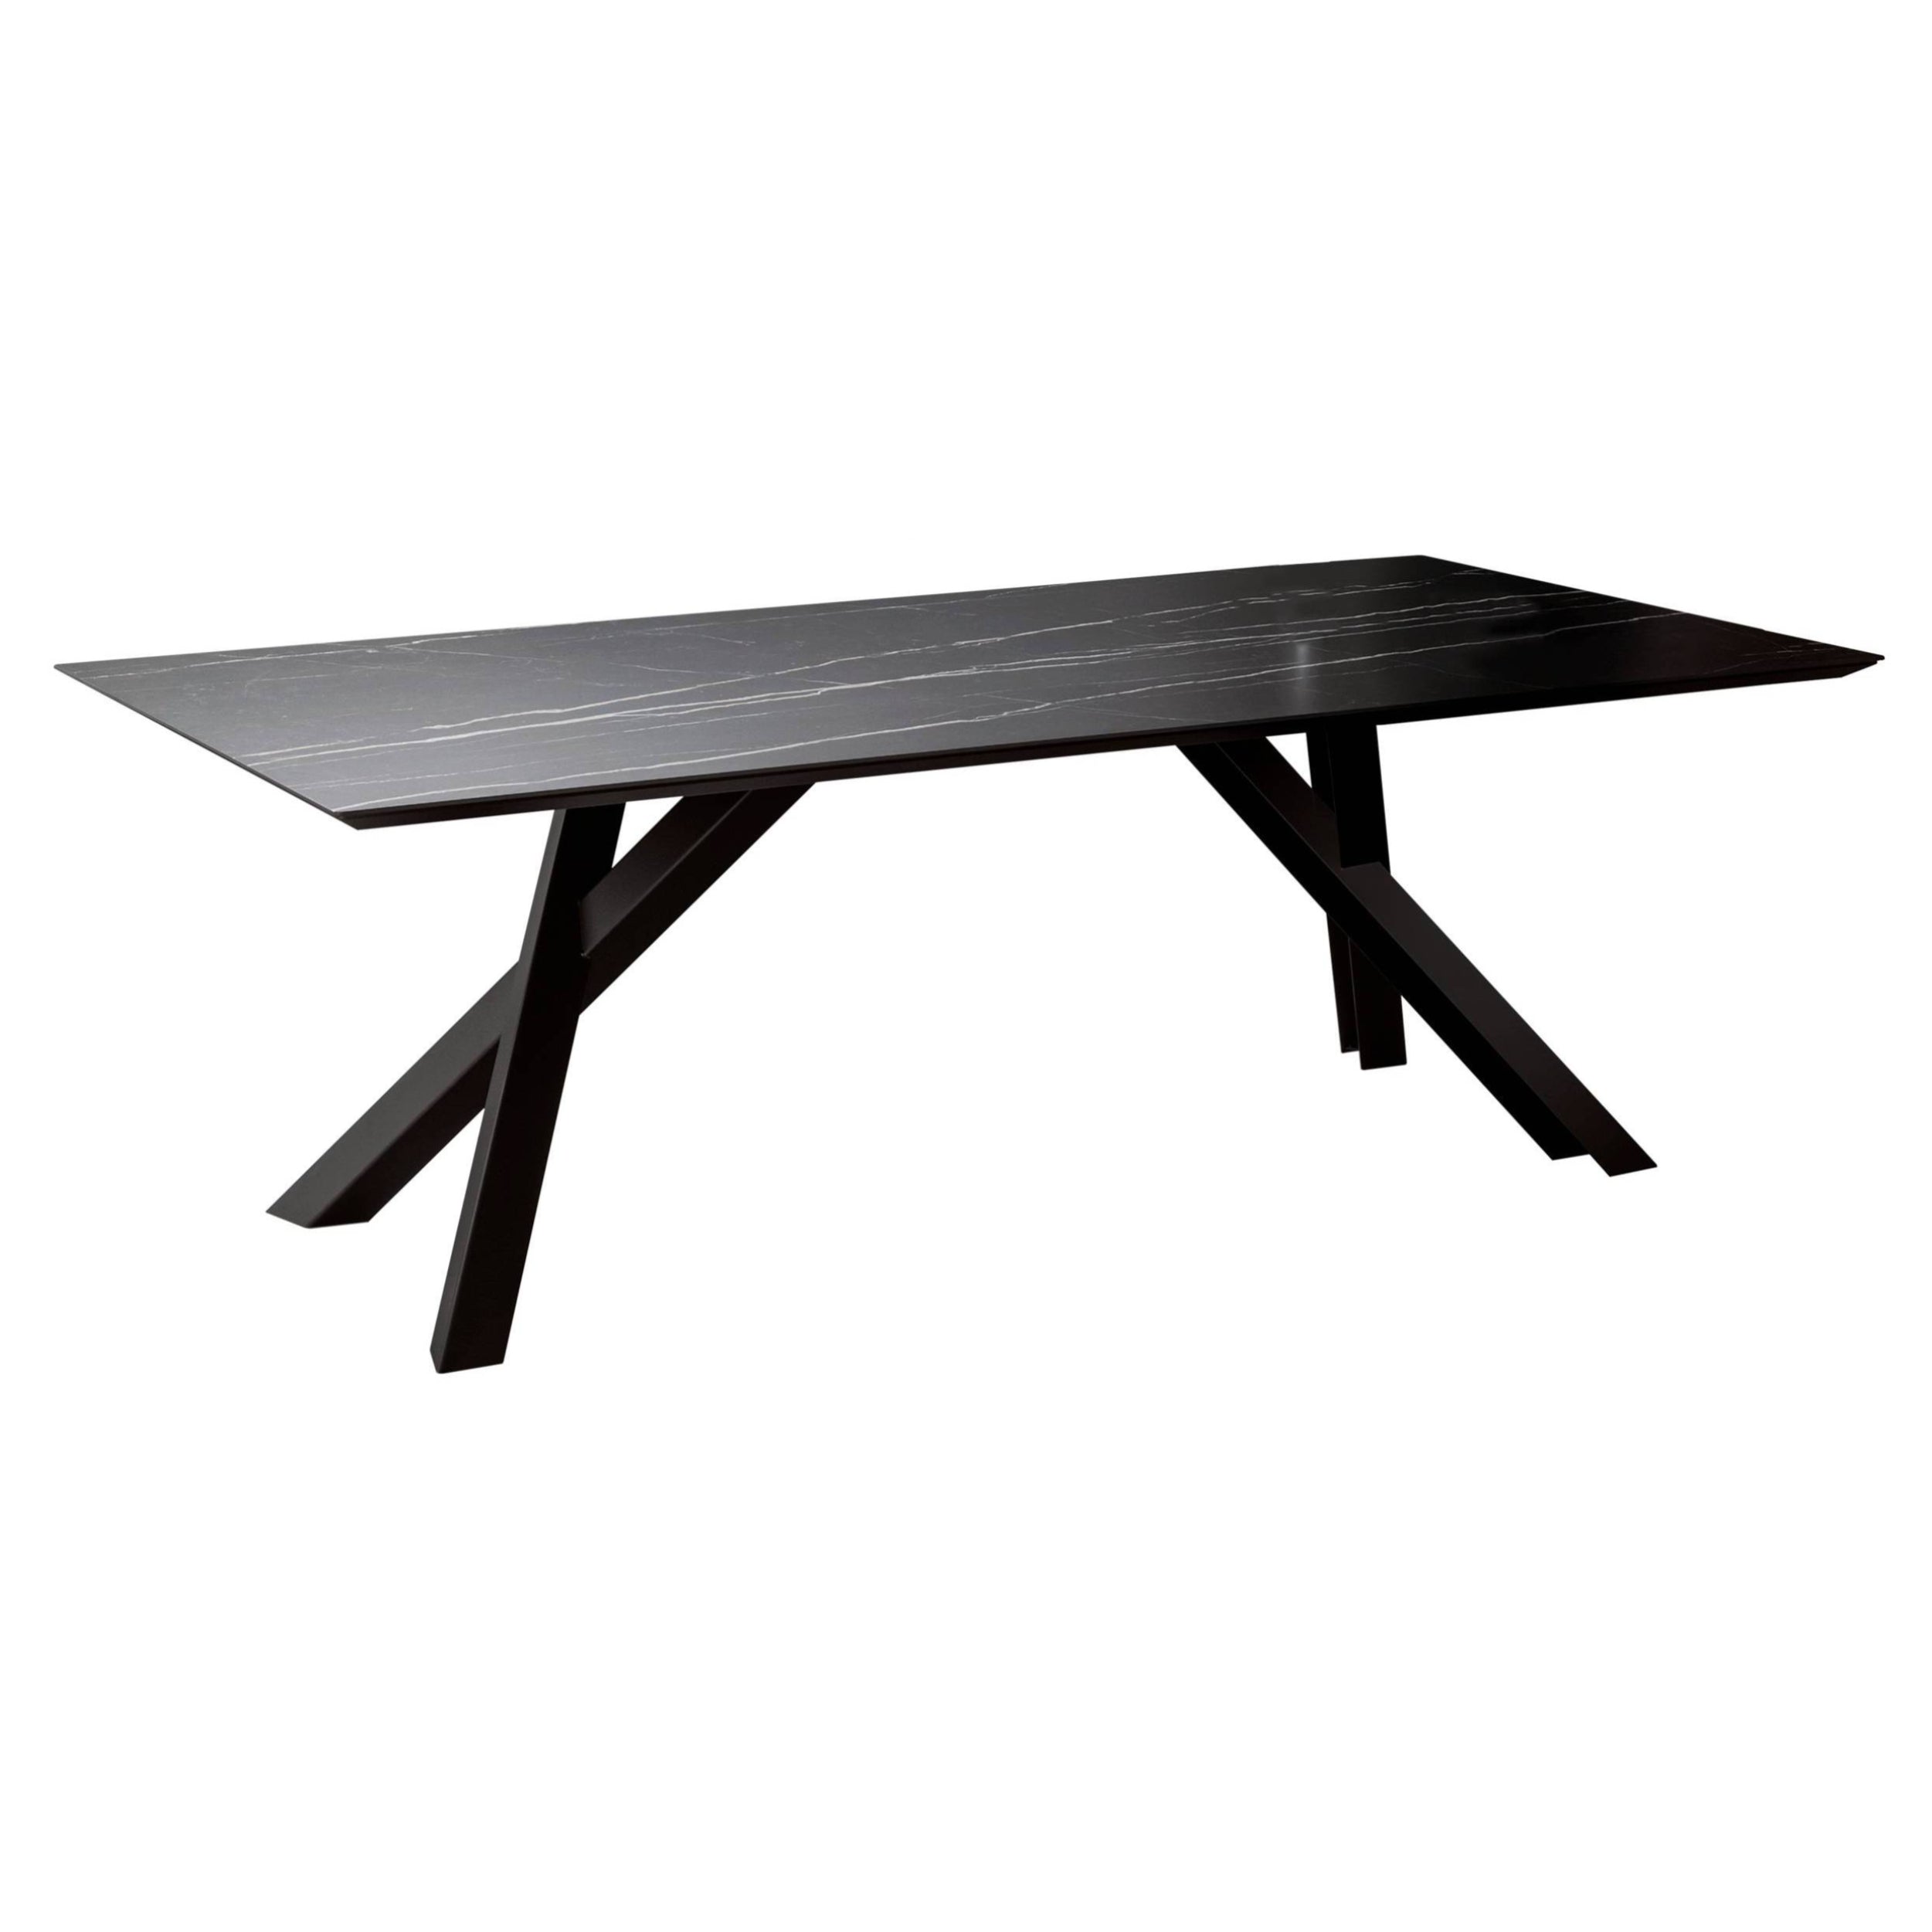 Gustave Dining Table: Large + Black Ash + Lacquered Black